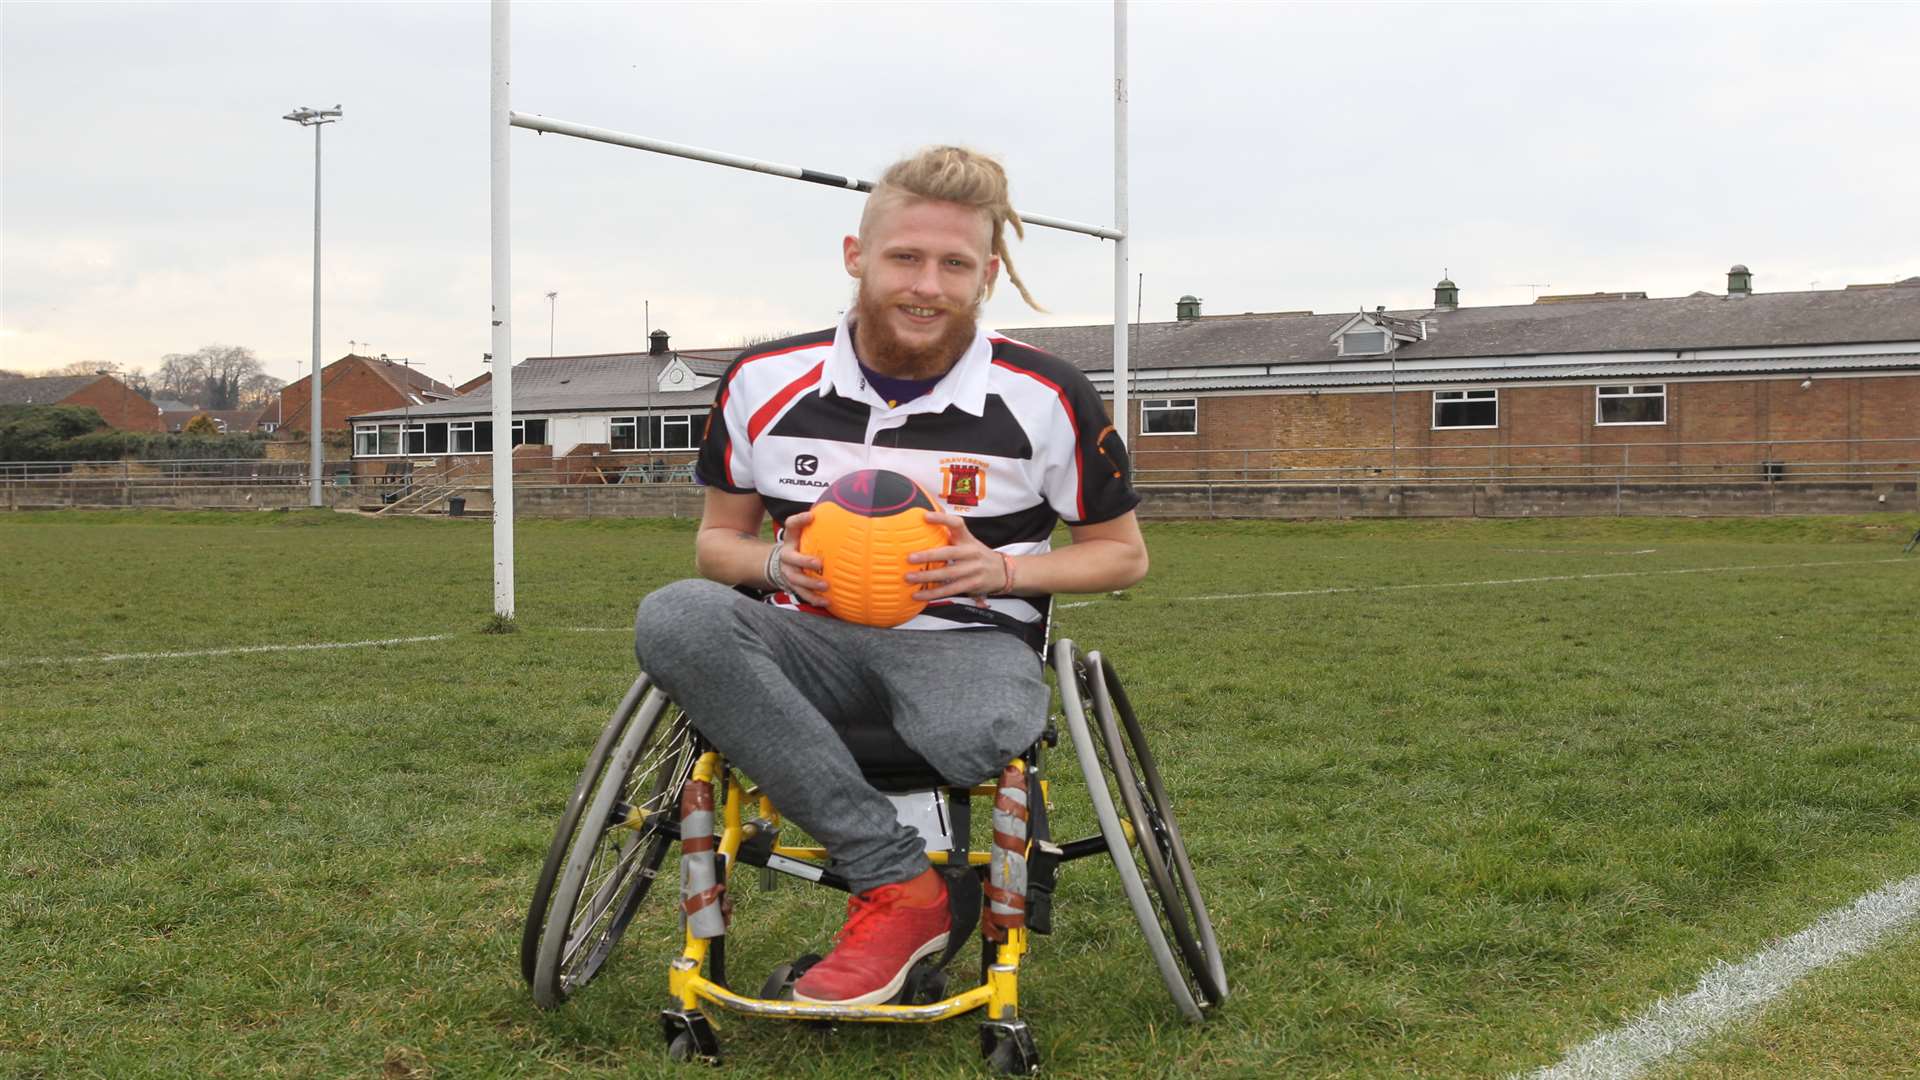 James Hazel has joined the local wheelchair rugby club